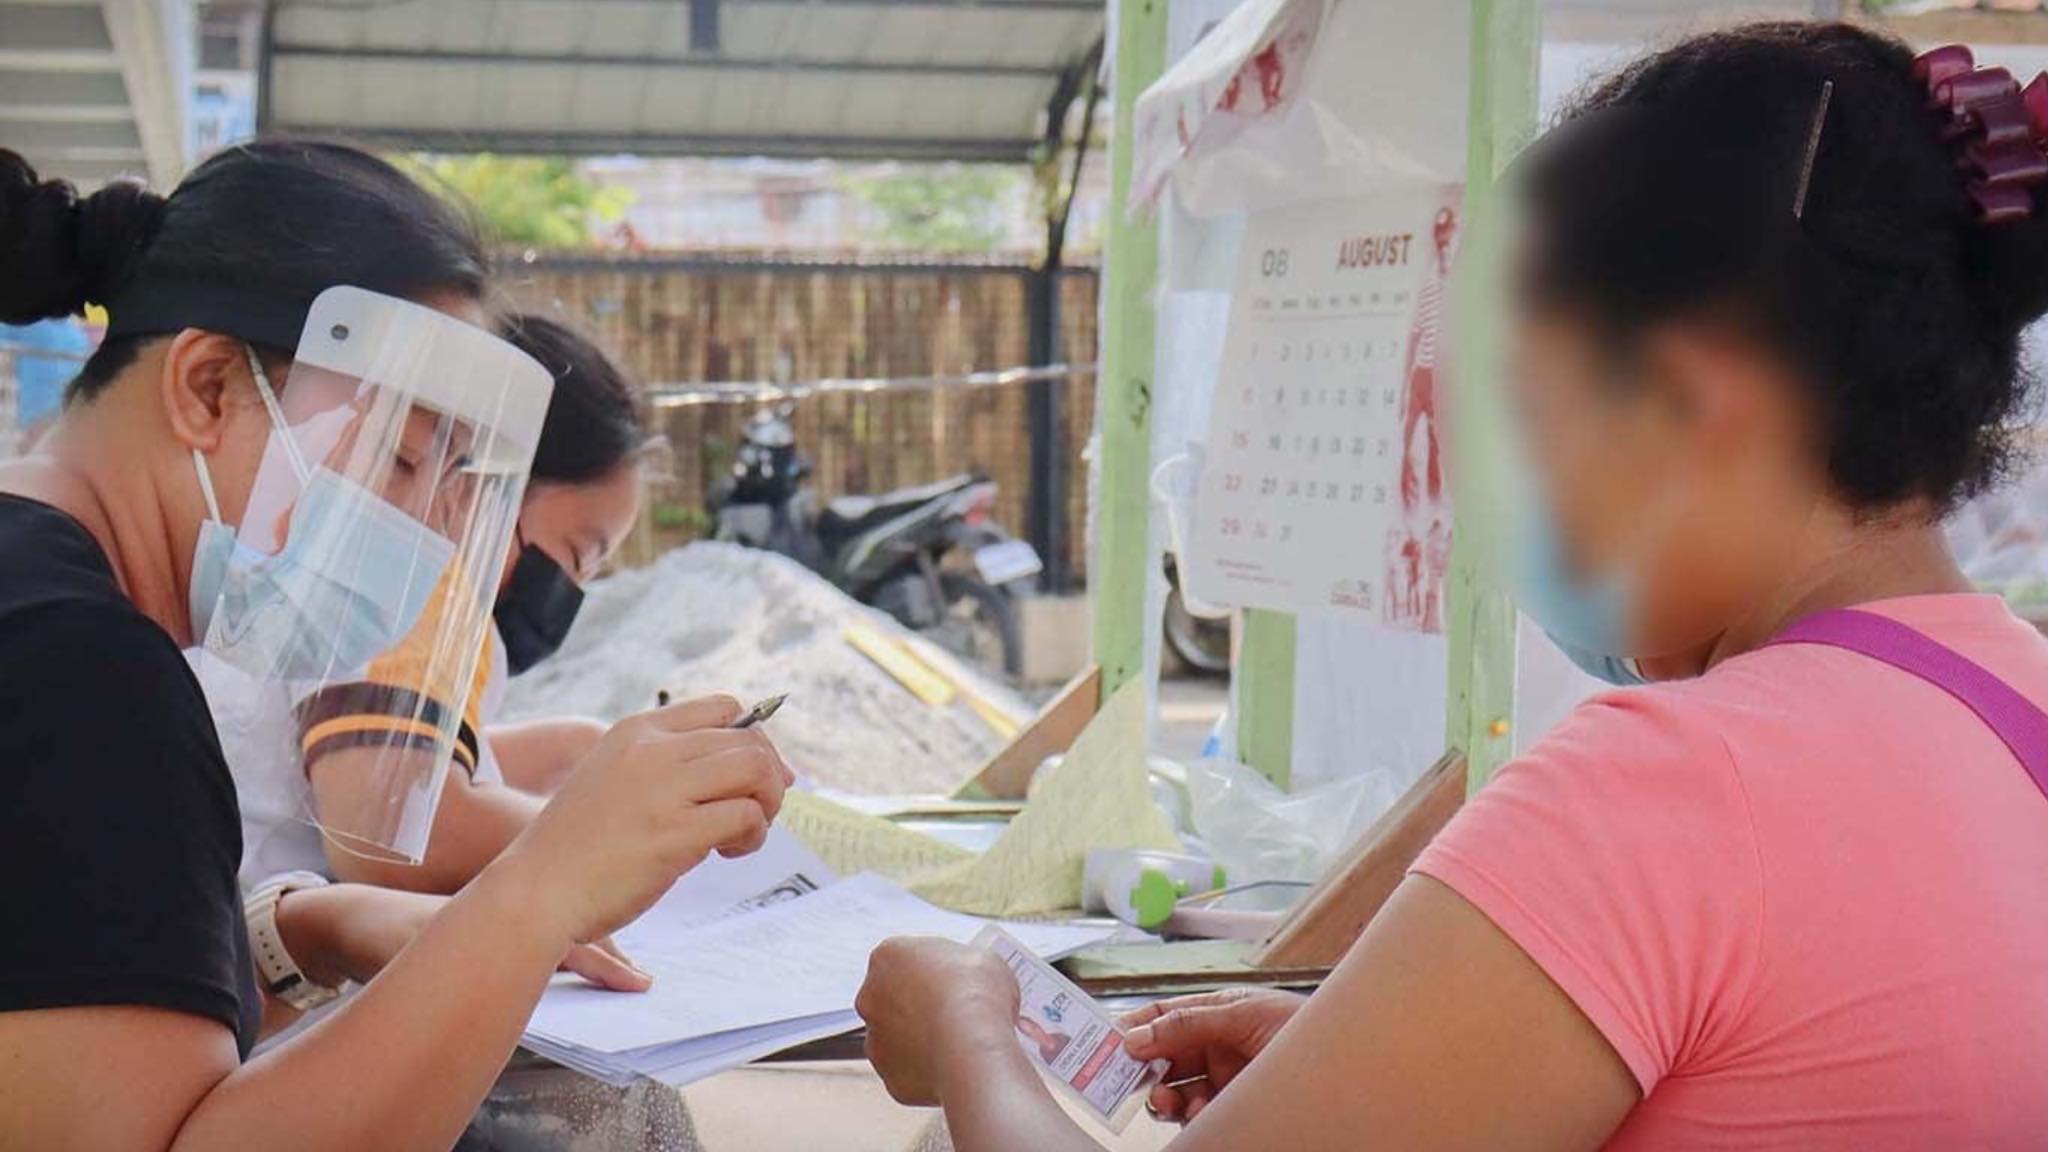 Healthcare workers in Zambales province prepare to vaccinate some of the local essential workers. (Photo courtesy of San Marcelino public information office)